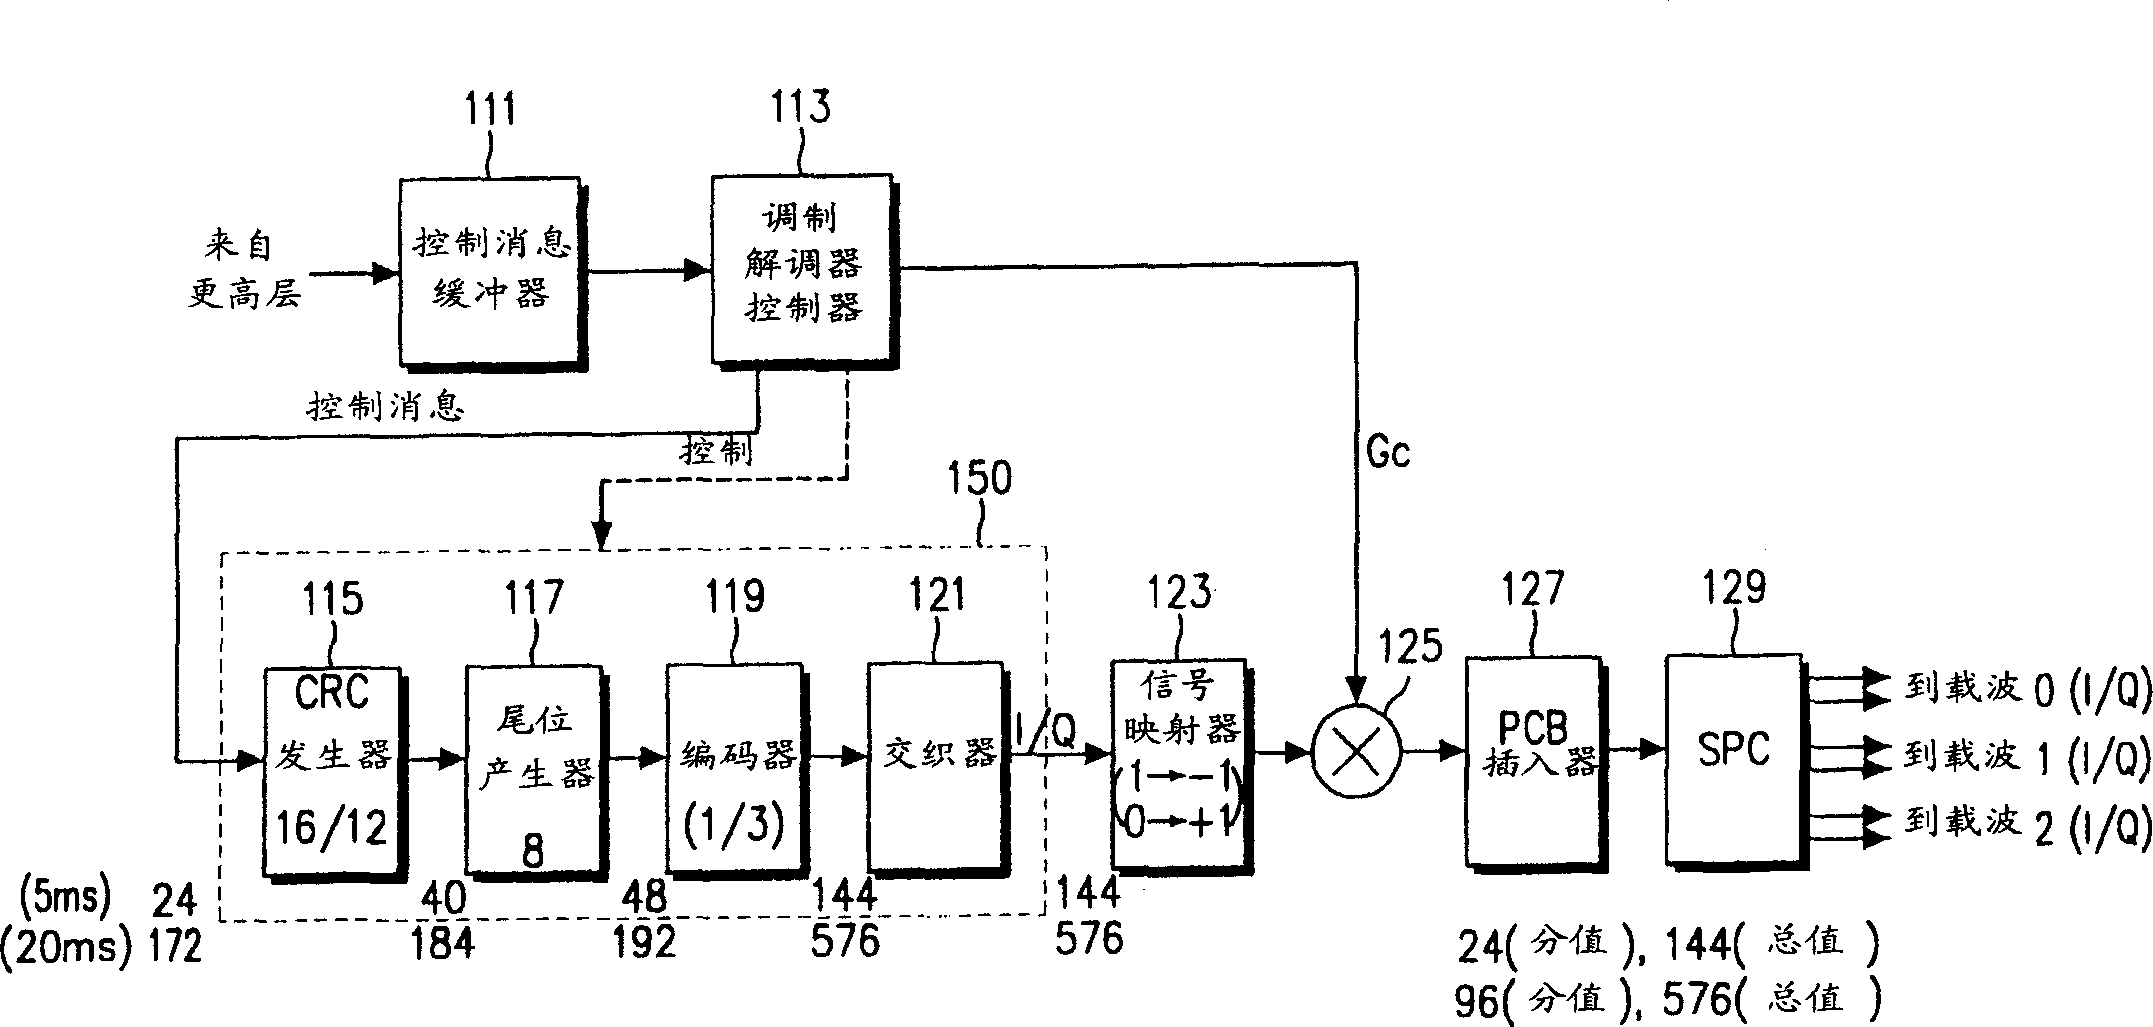 Transmitting and receiving device and method for continuous outer-loop power control while in DTX mode in a CDMA mobile communication system